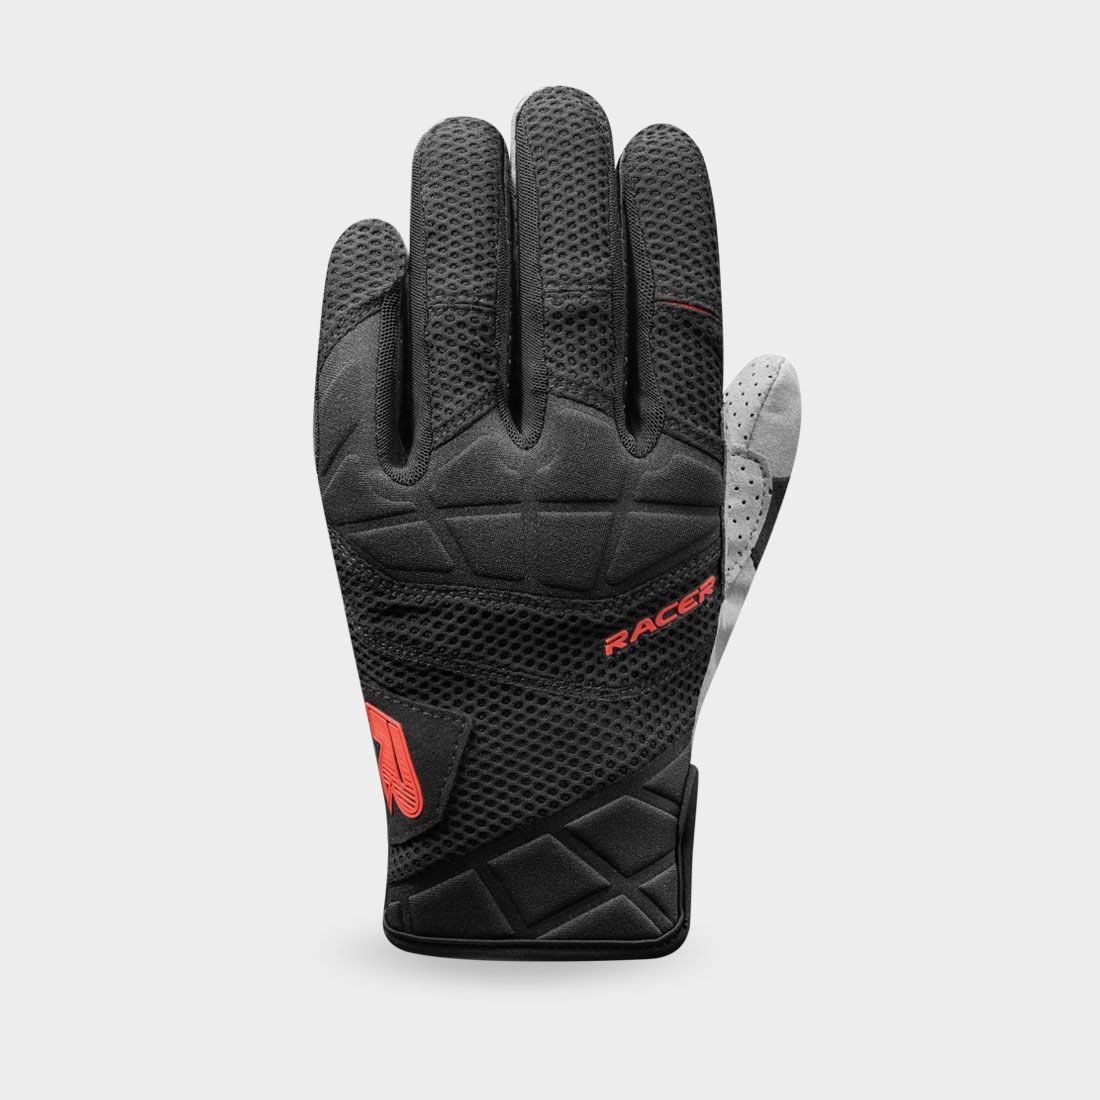 Bicycle Racer Gloves - AIR RACE